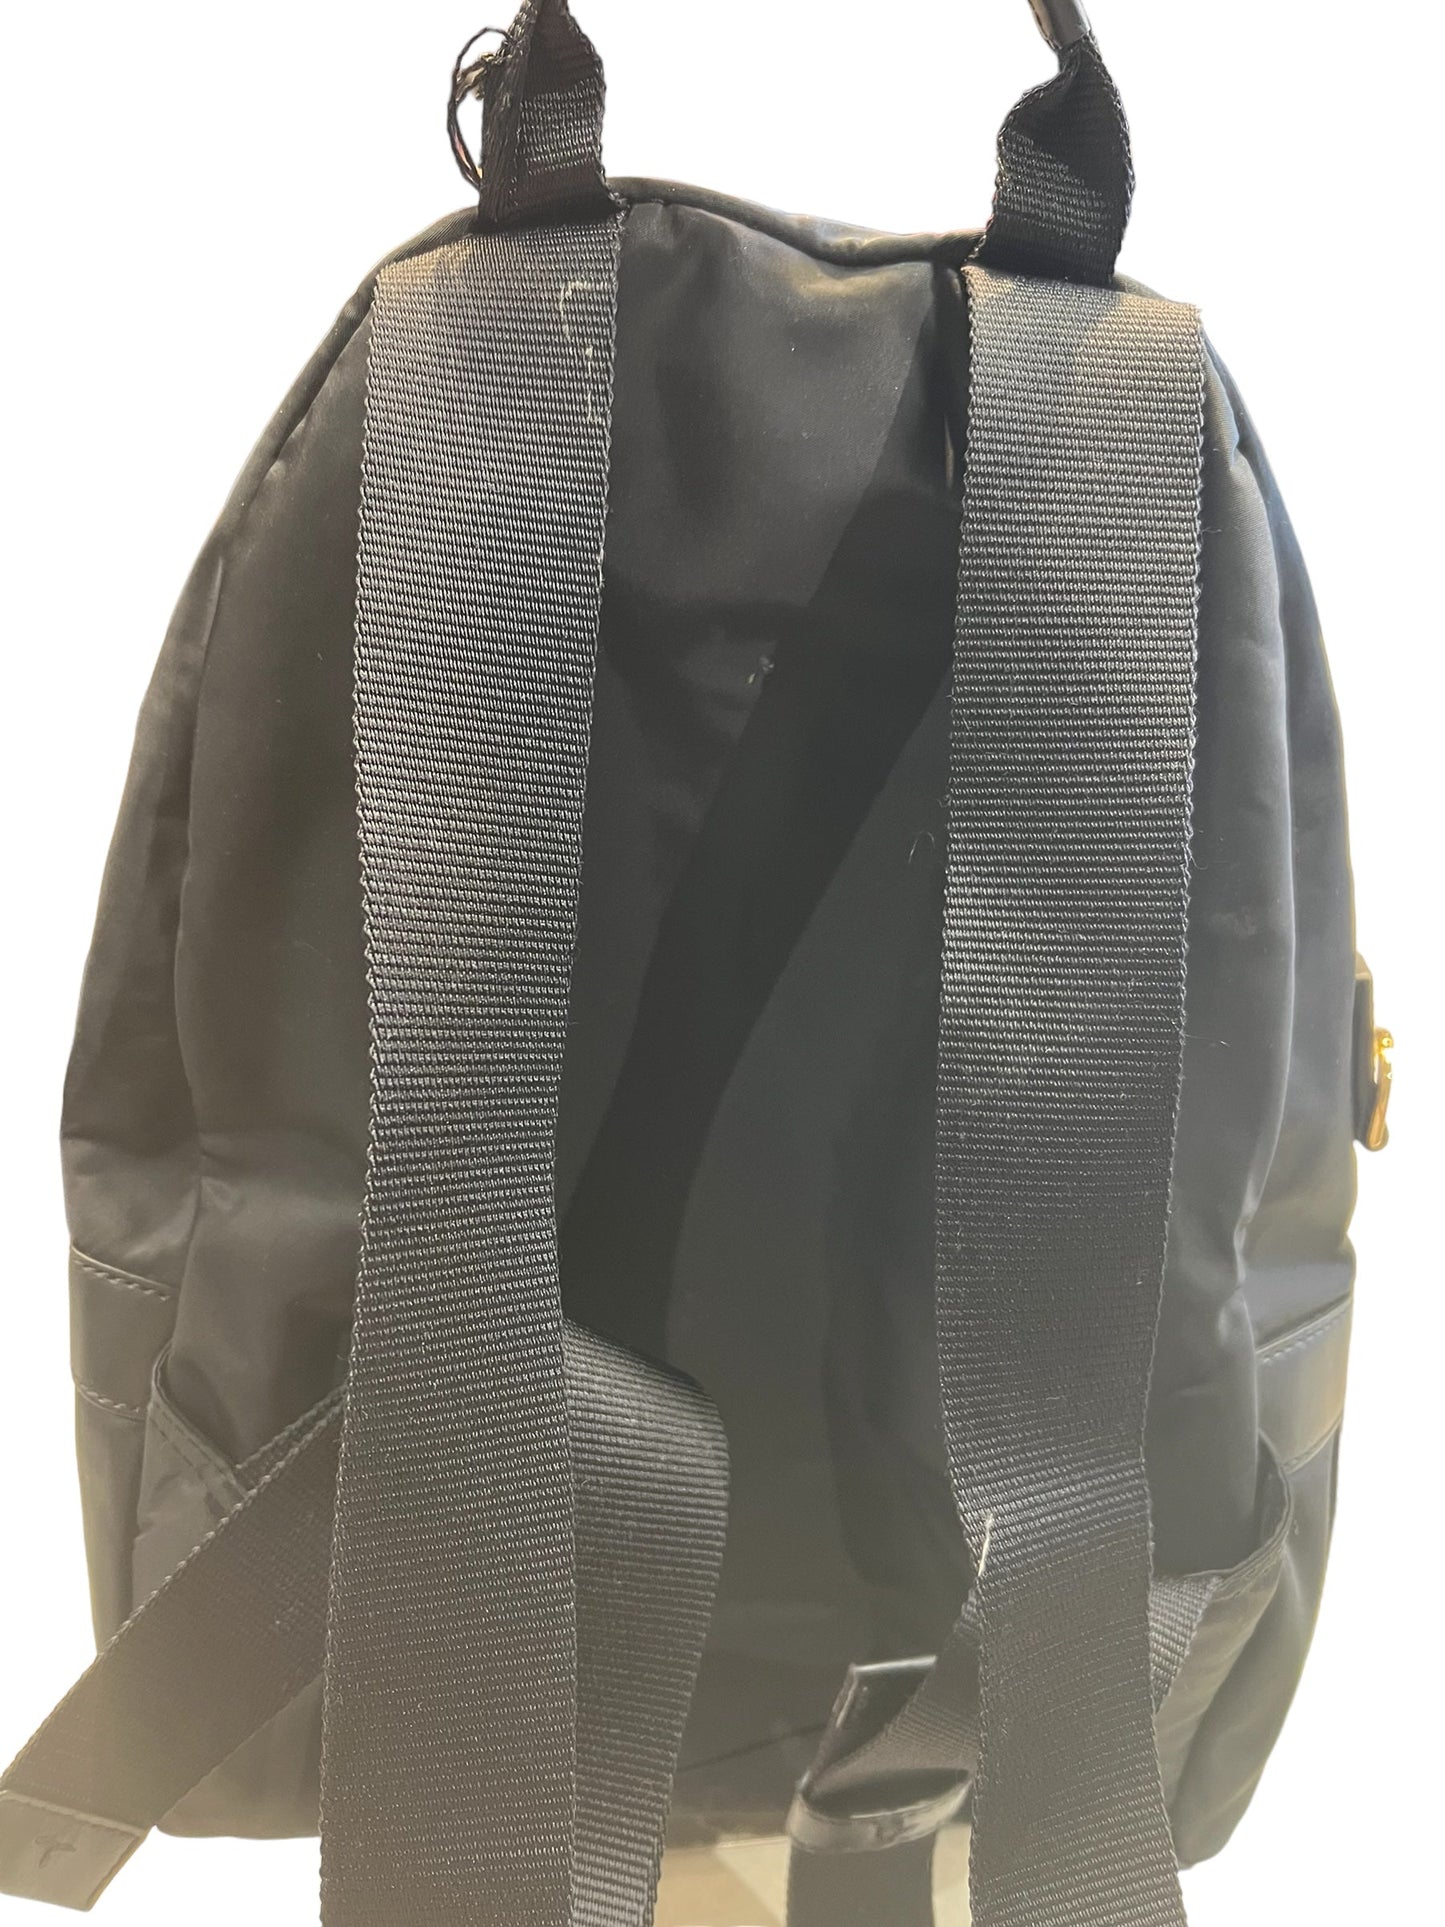 Backpack Designer By Tory Burch  Size: Medium